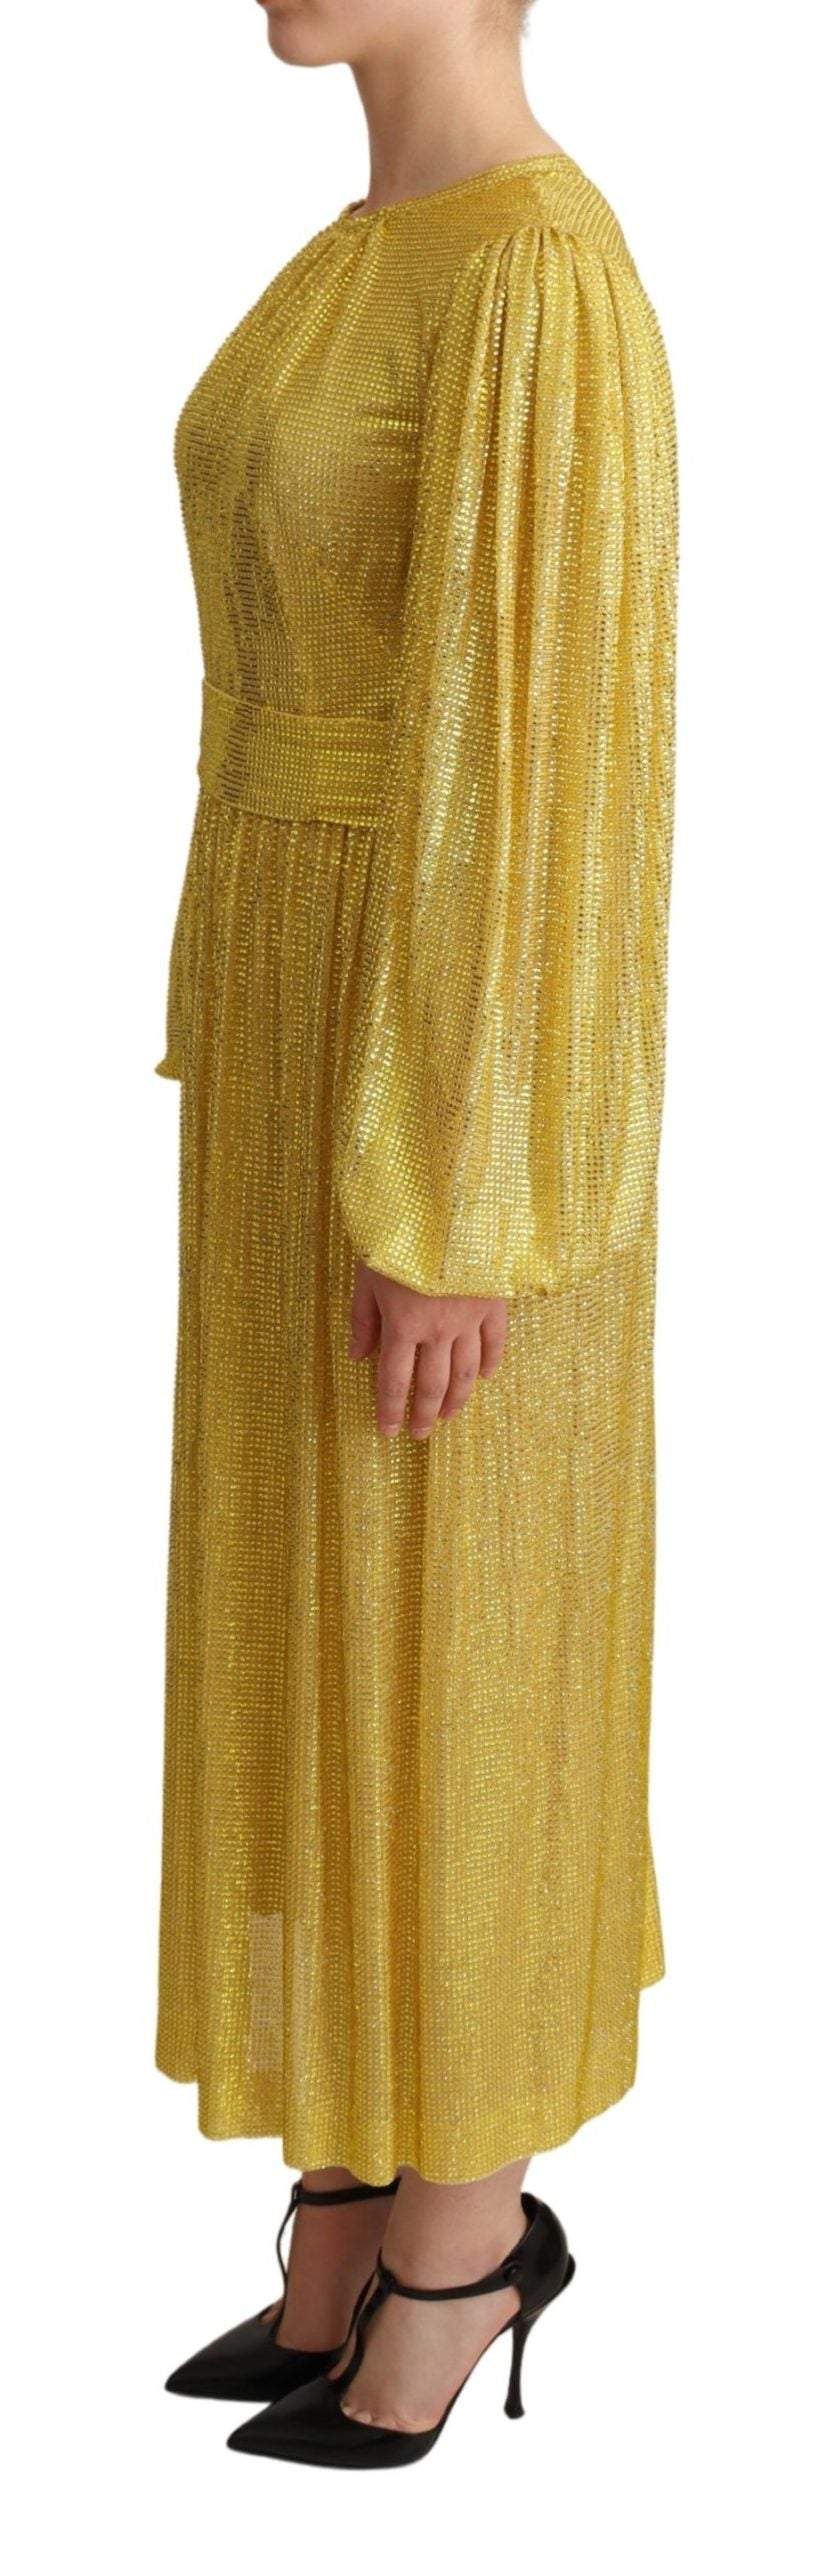 Dolce & Gabbana Yellow Crystal Mesh Pleated Maxi Dress Dolce & Gabbana, Dresses - Women - Clothing, feed-agegroup-adult, feed-color-Yellow, feed-gender-female, IT38|XS, Yellow at SEYMAYKA